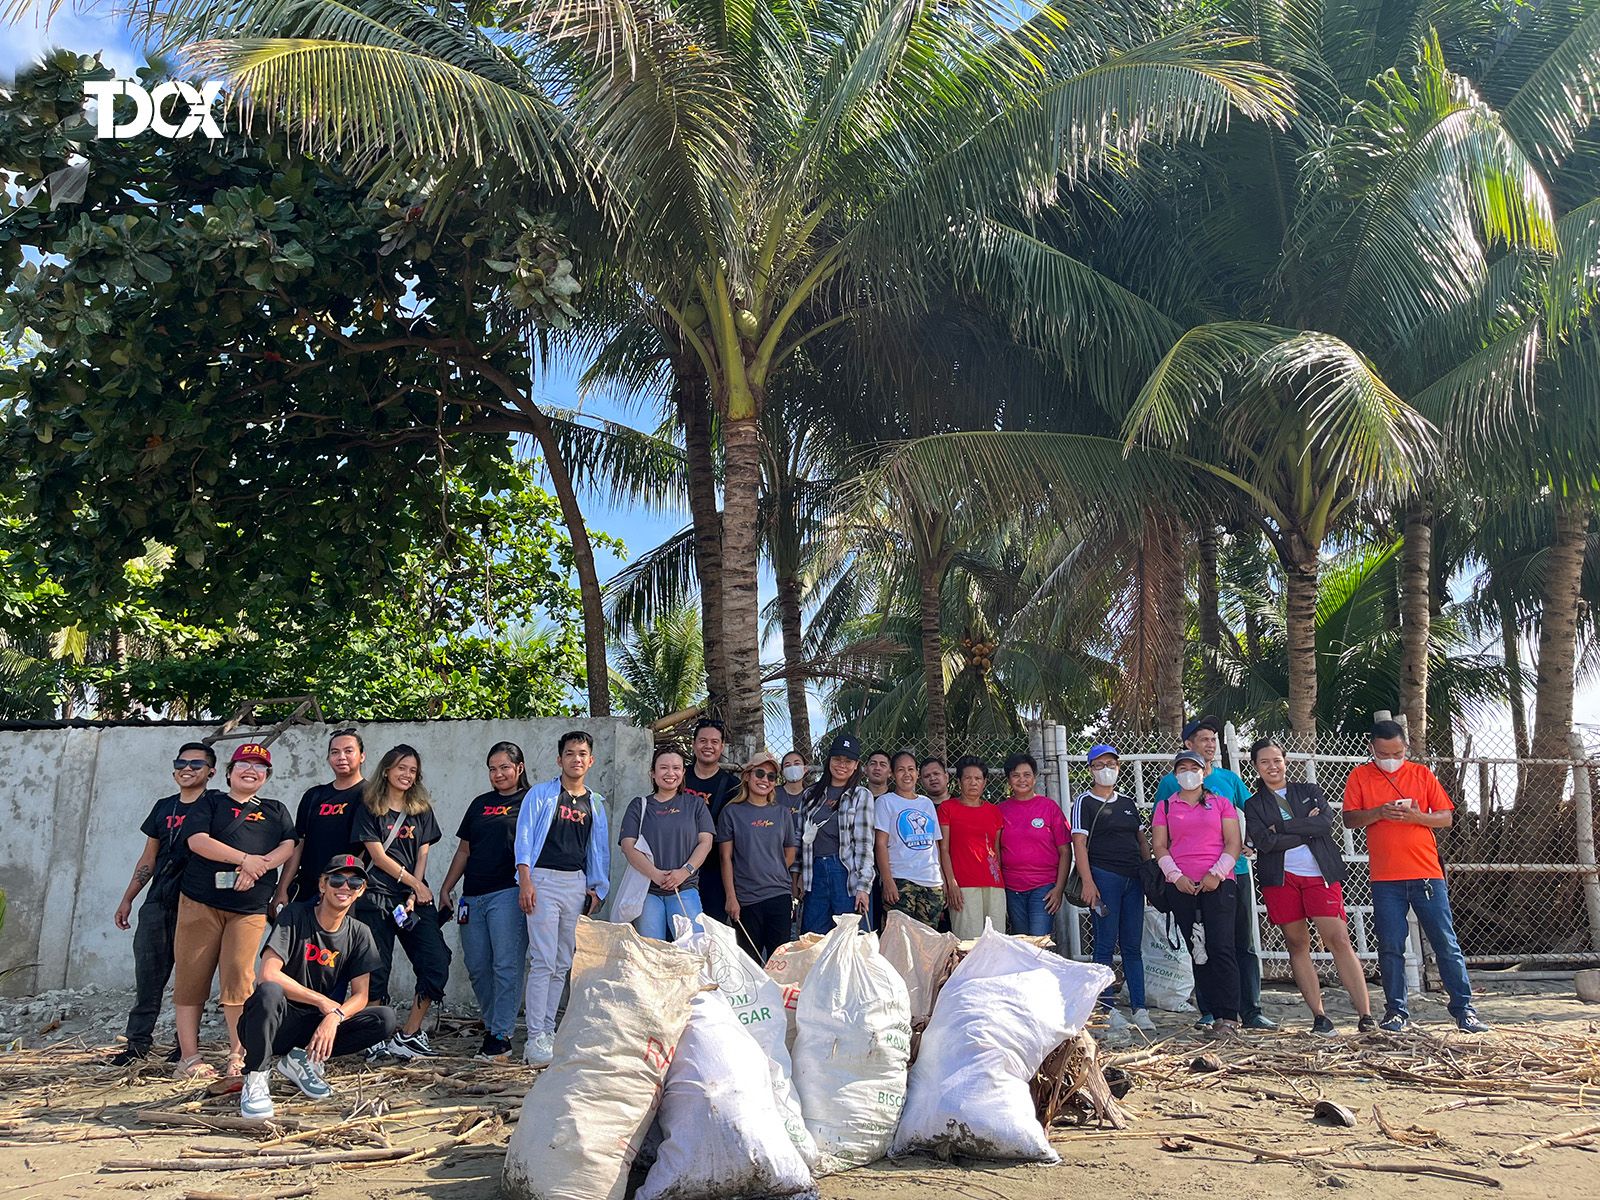 Philippines —- Taken after the Waves of Change: Coastal Clean Up Drive in Molo, Iloilo City